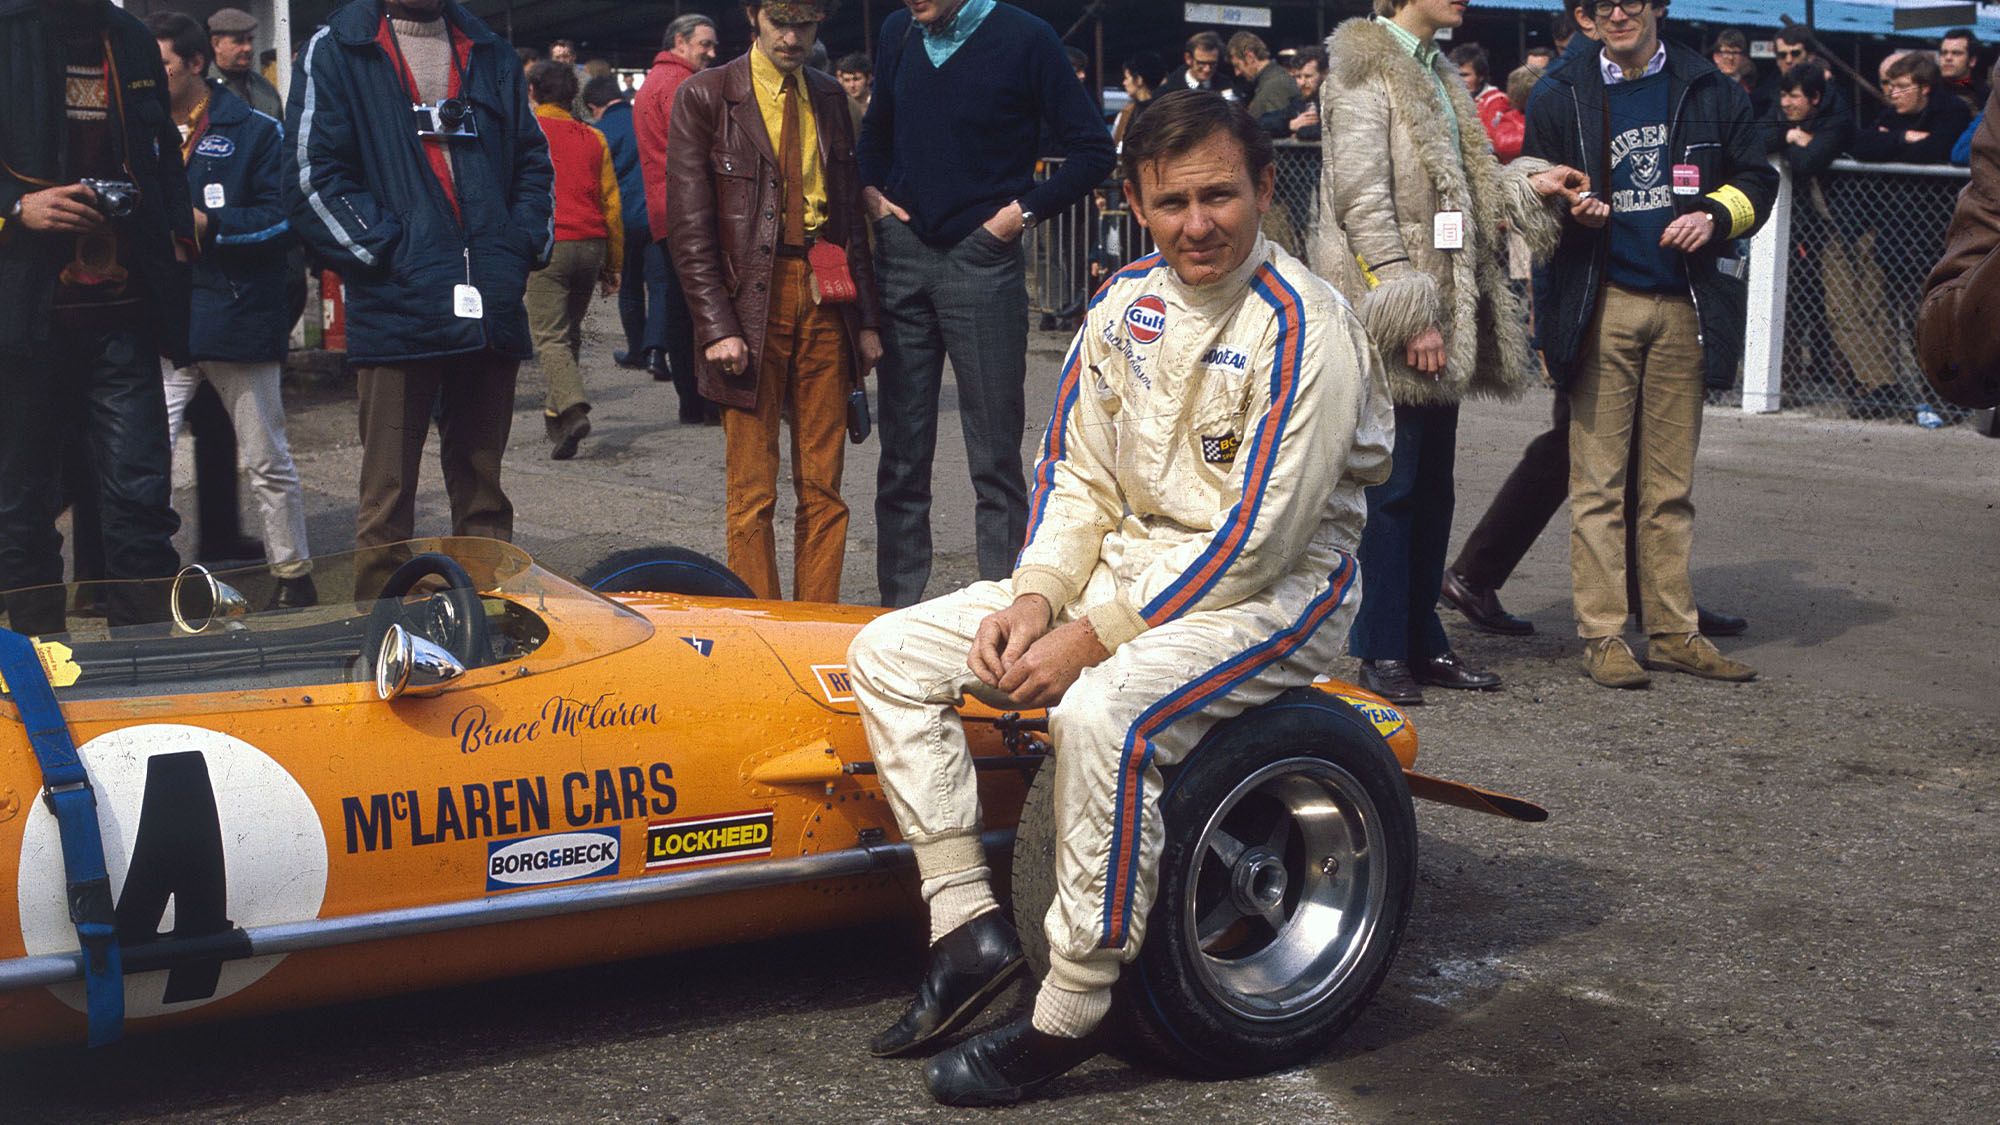 A Look Back At The Life And Work Of Bruce McLaren